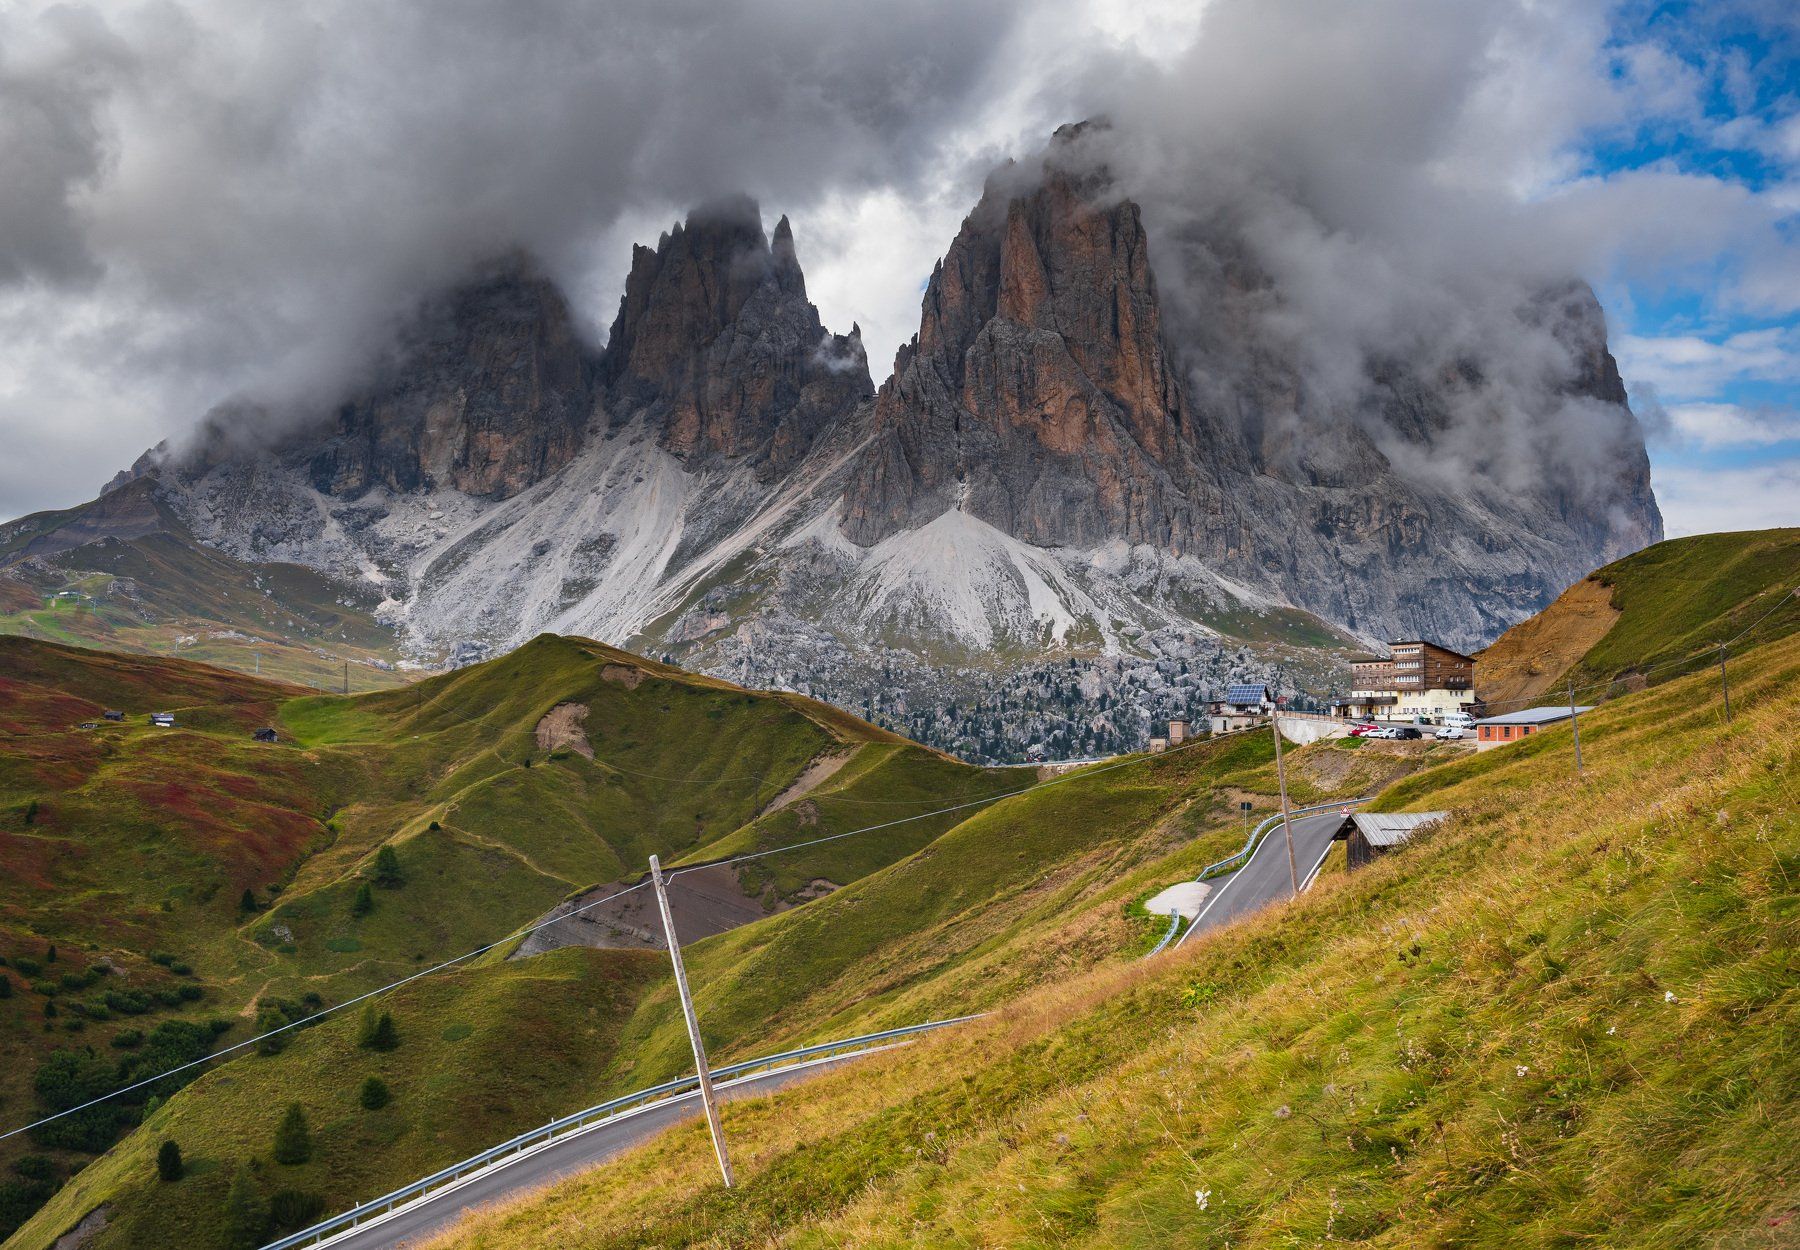 alps mountains,asphalt,clouds,dolomites,forest,funicular,hiking,hills,italy,journey,landscape,mountain,nature,peak,rainbow,road,rock,sky,tourism,travel,tree,view,village house,village landscape,way, Косарев Борис